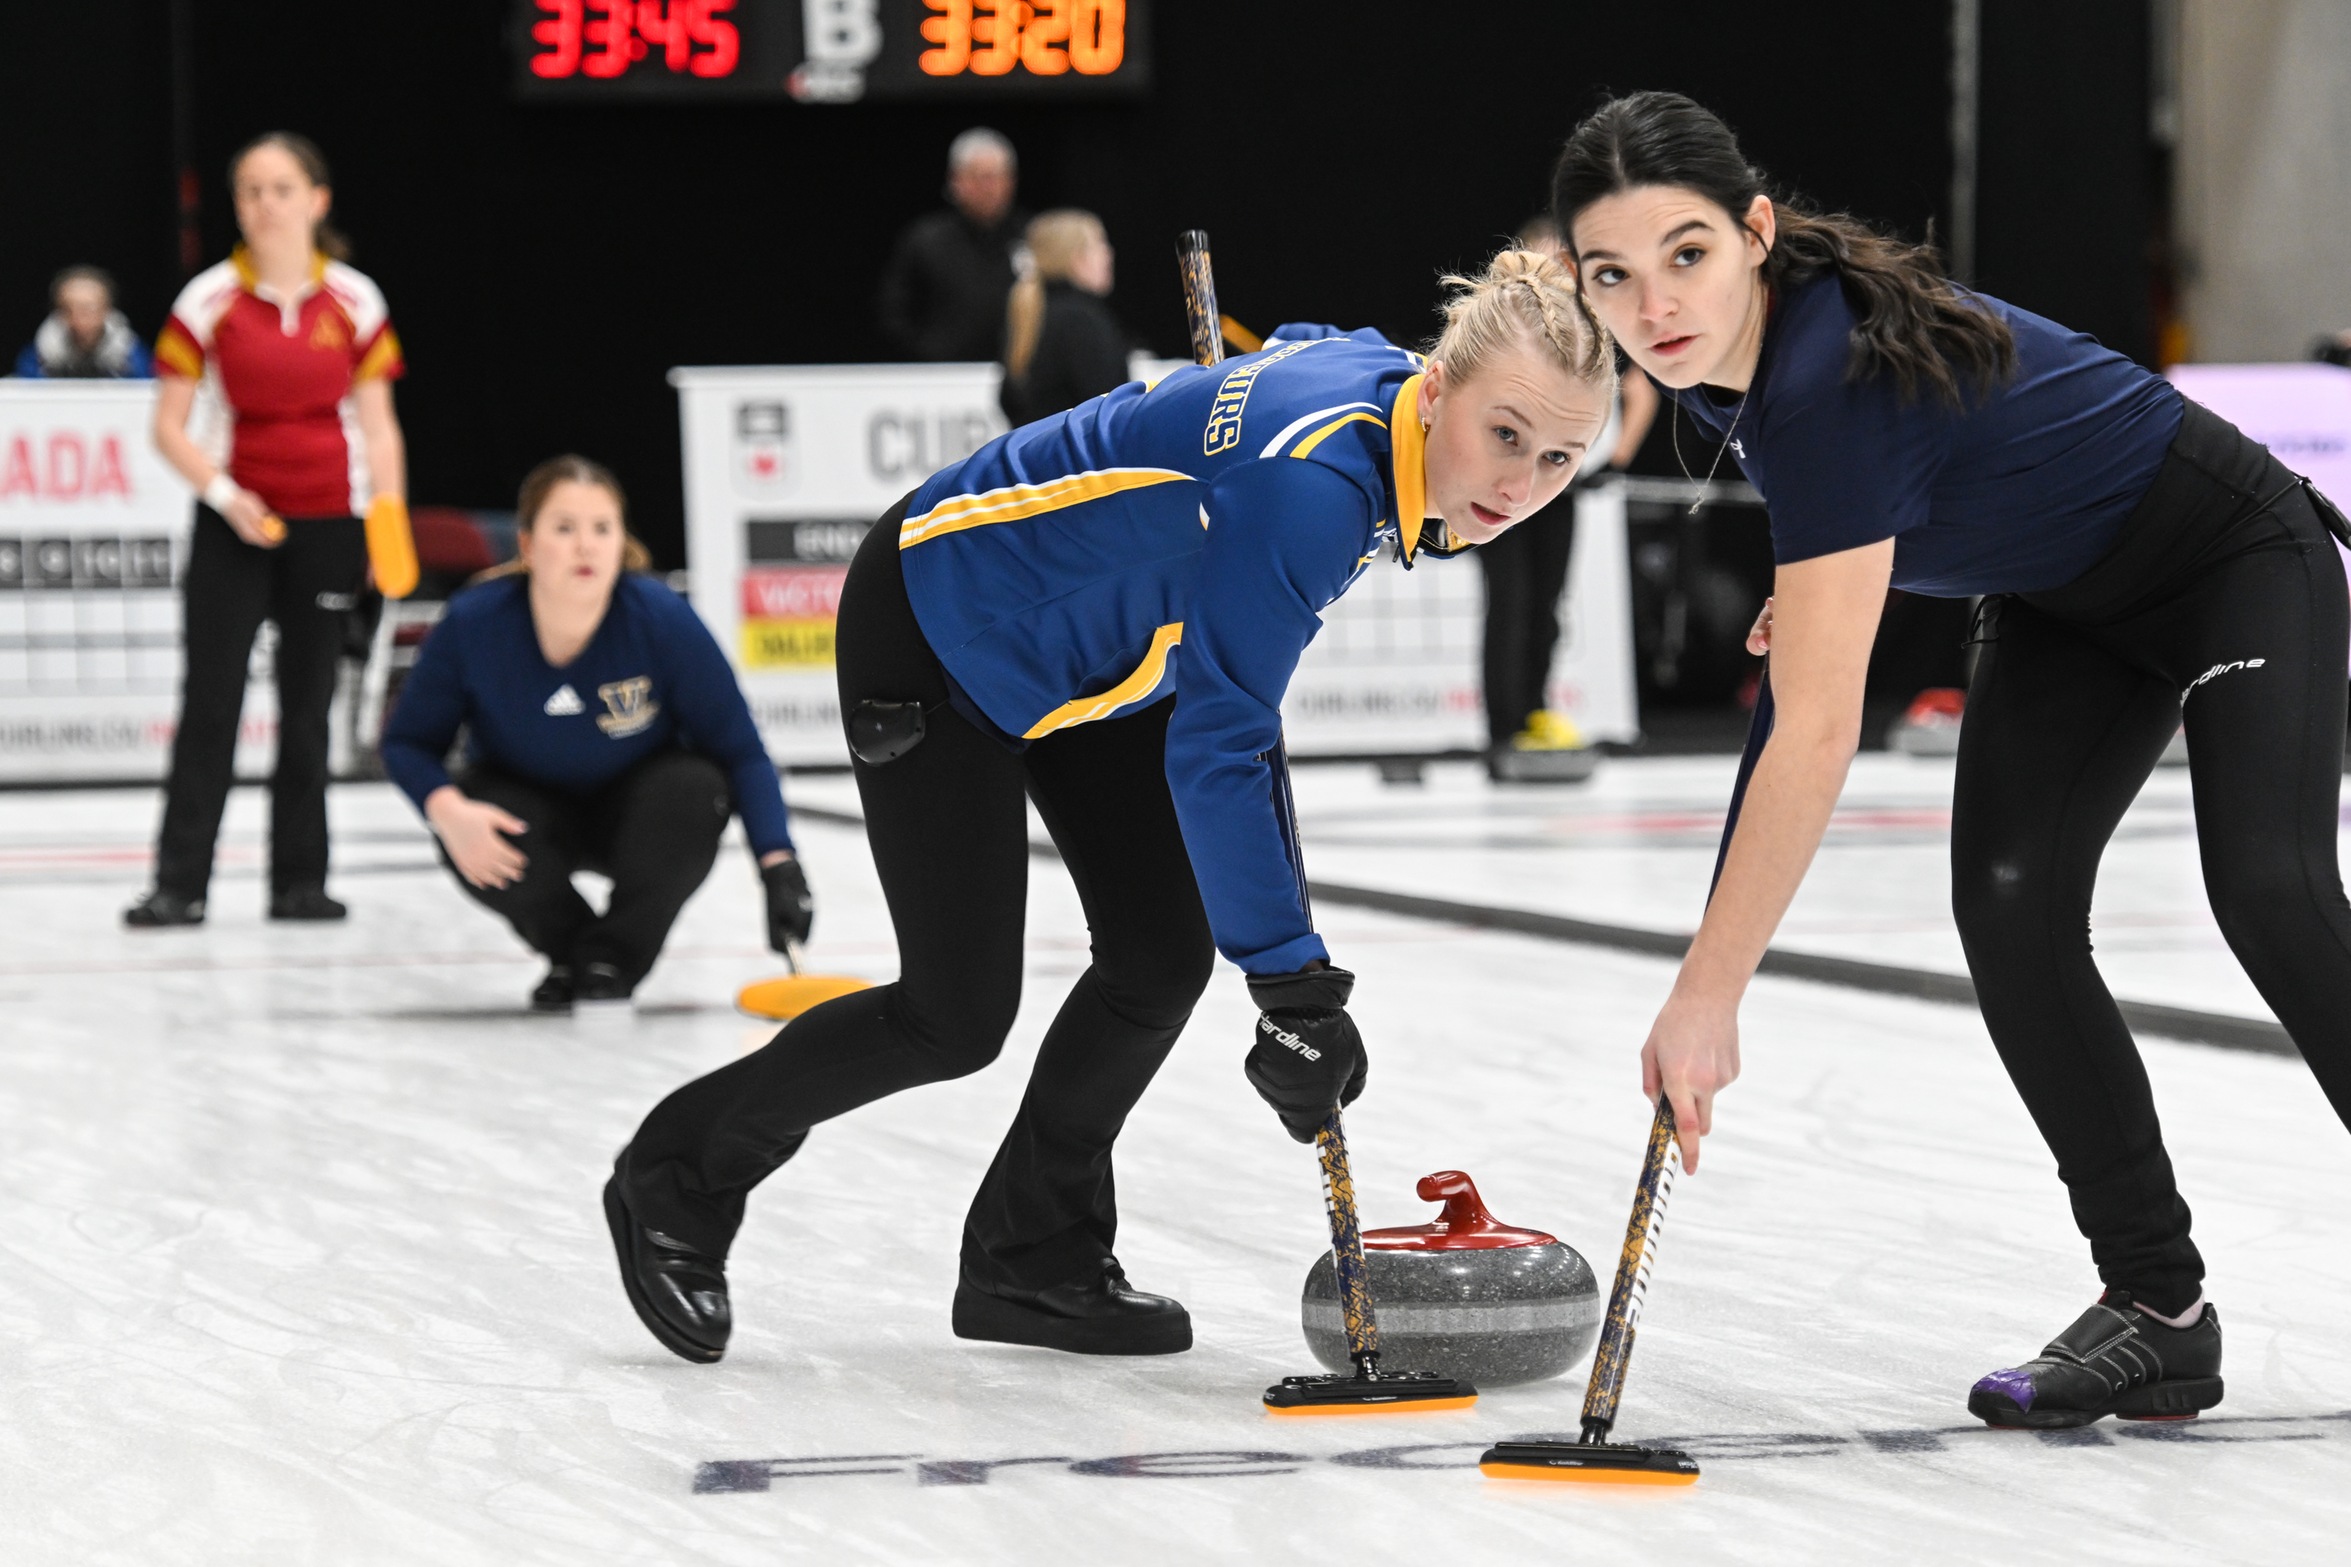 Mya Smith and Britney Malette sweeping a rock at the USPORTS Championships - Rob Blanchard (Curling Canada)